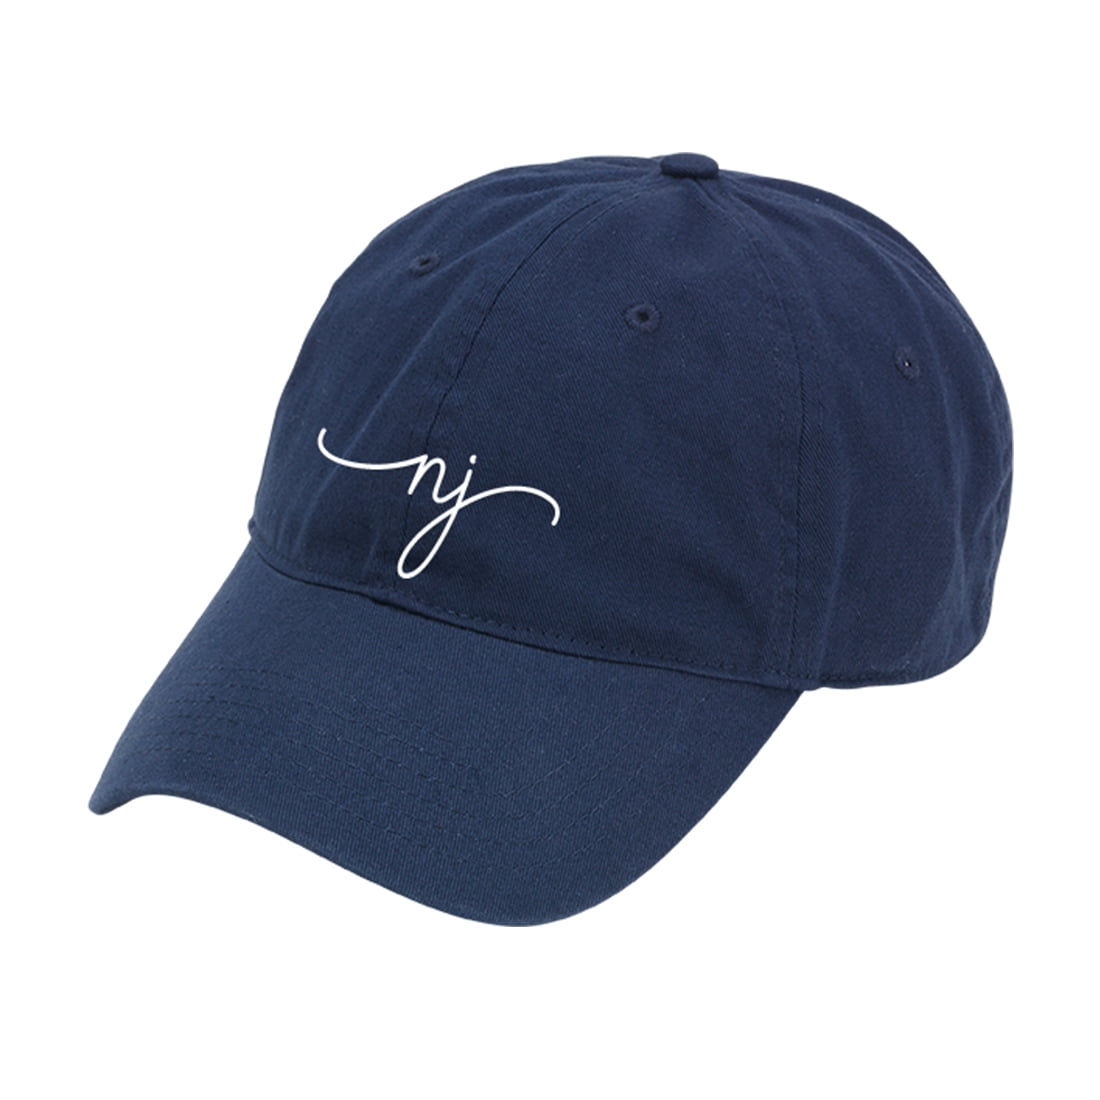 New Jersey Rep Your State Navy Cap